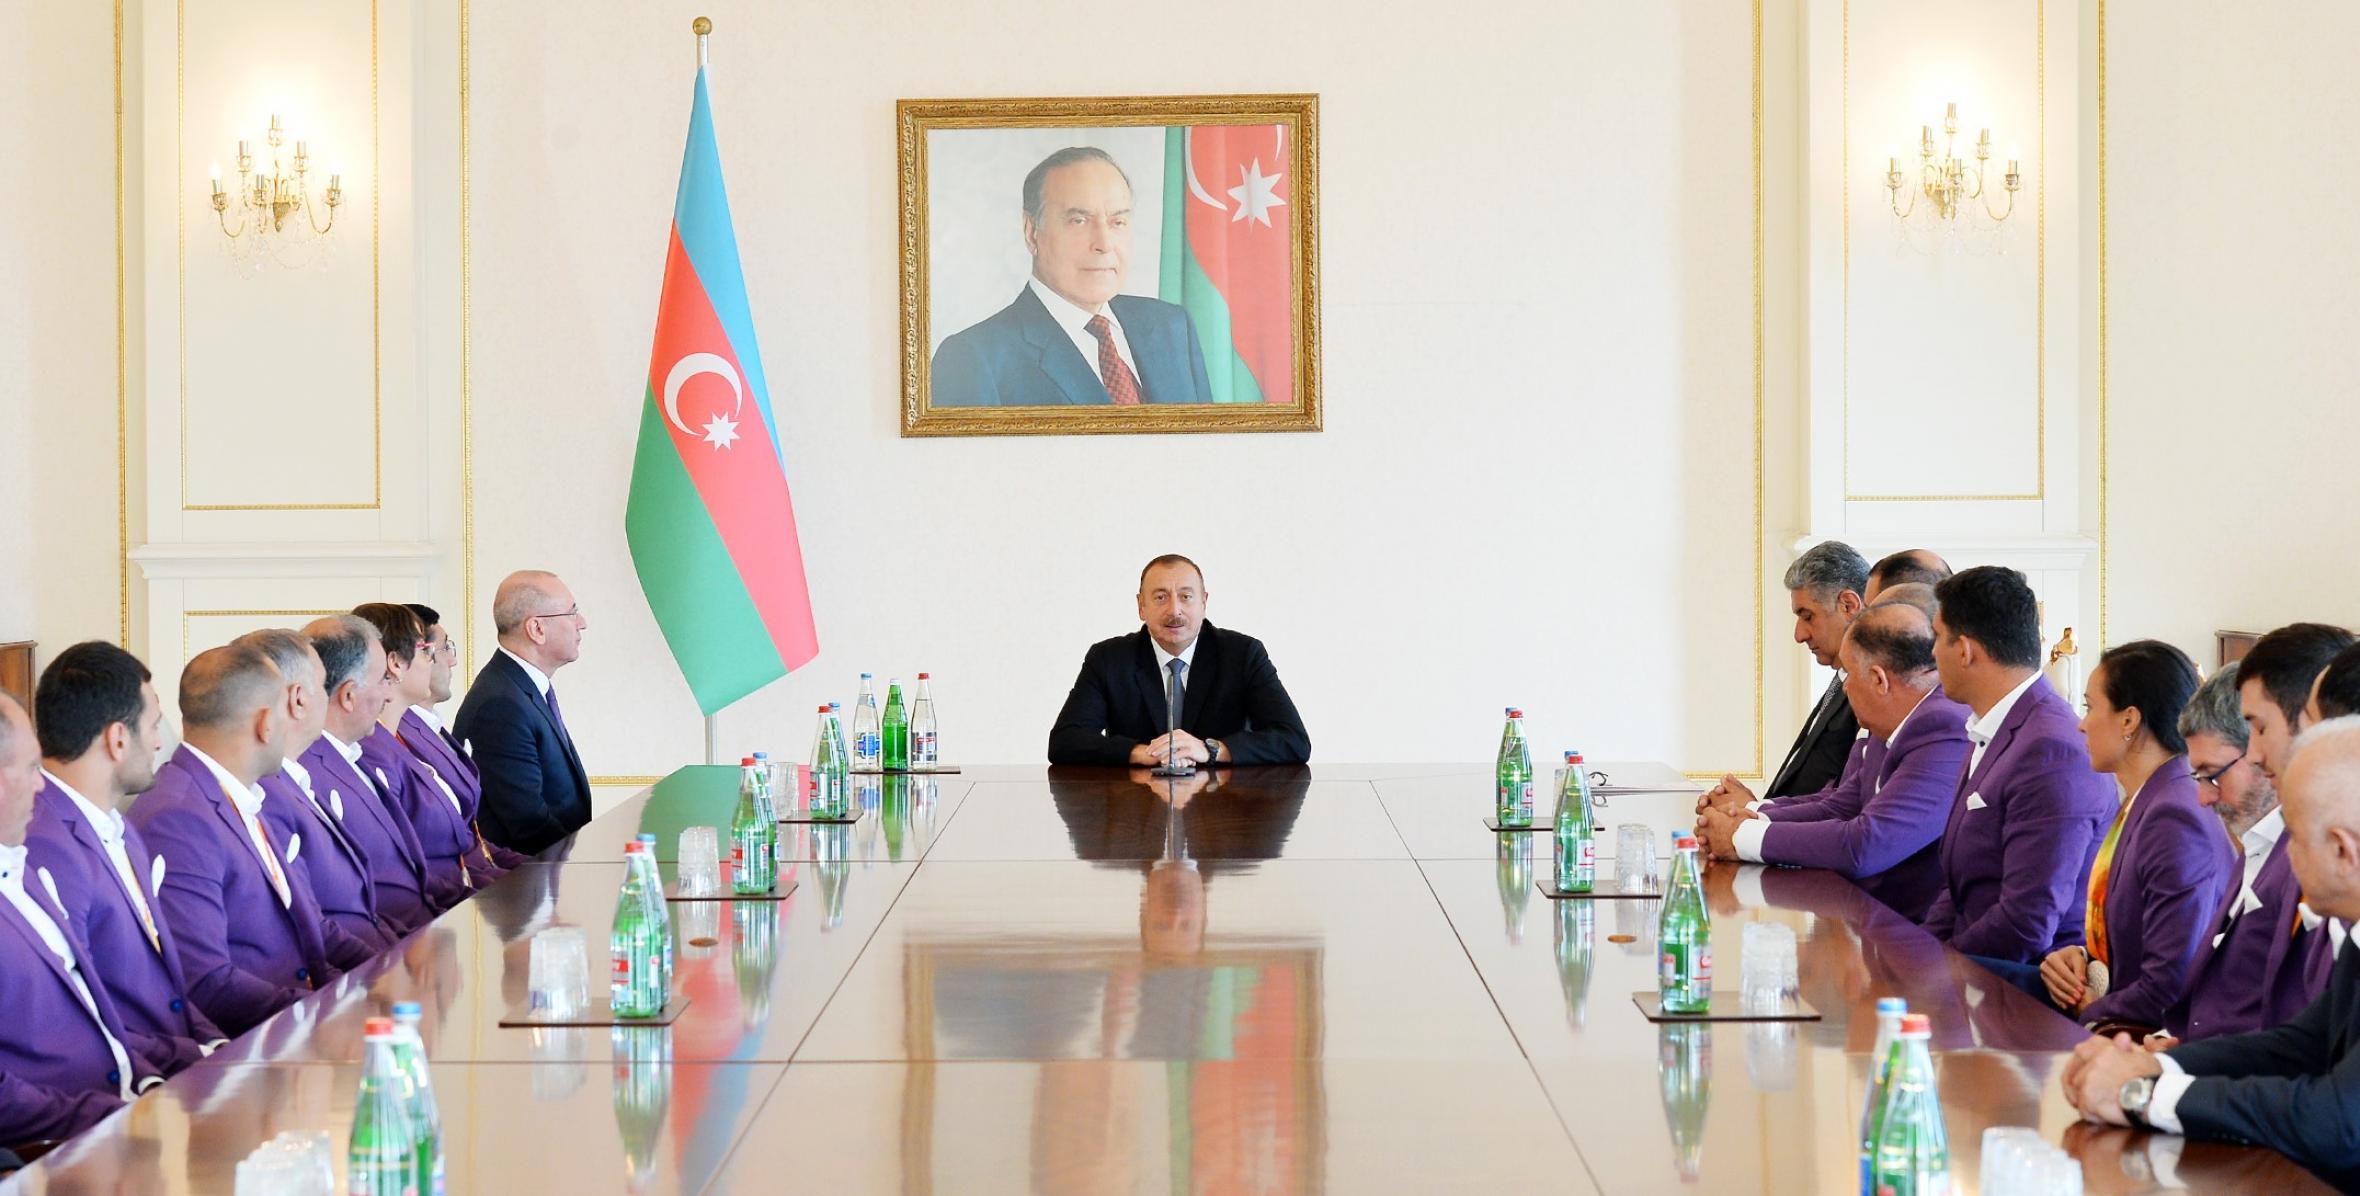 Speech by Ilham Aliyev at the meeting with athletes who competed in 15th Summer Paralympic Games